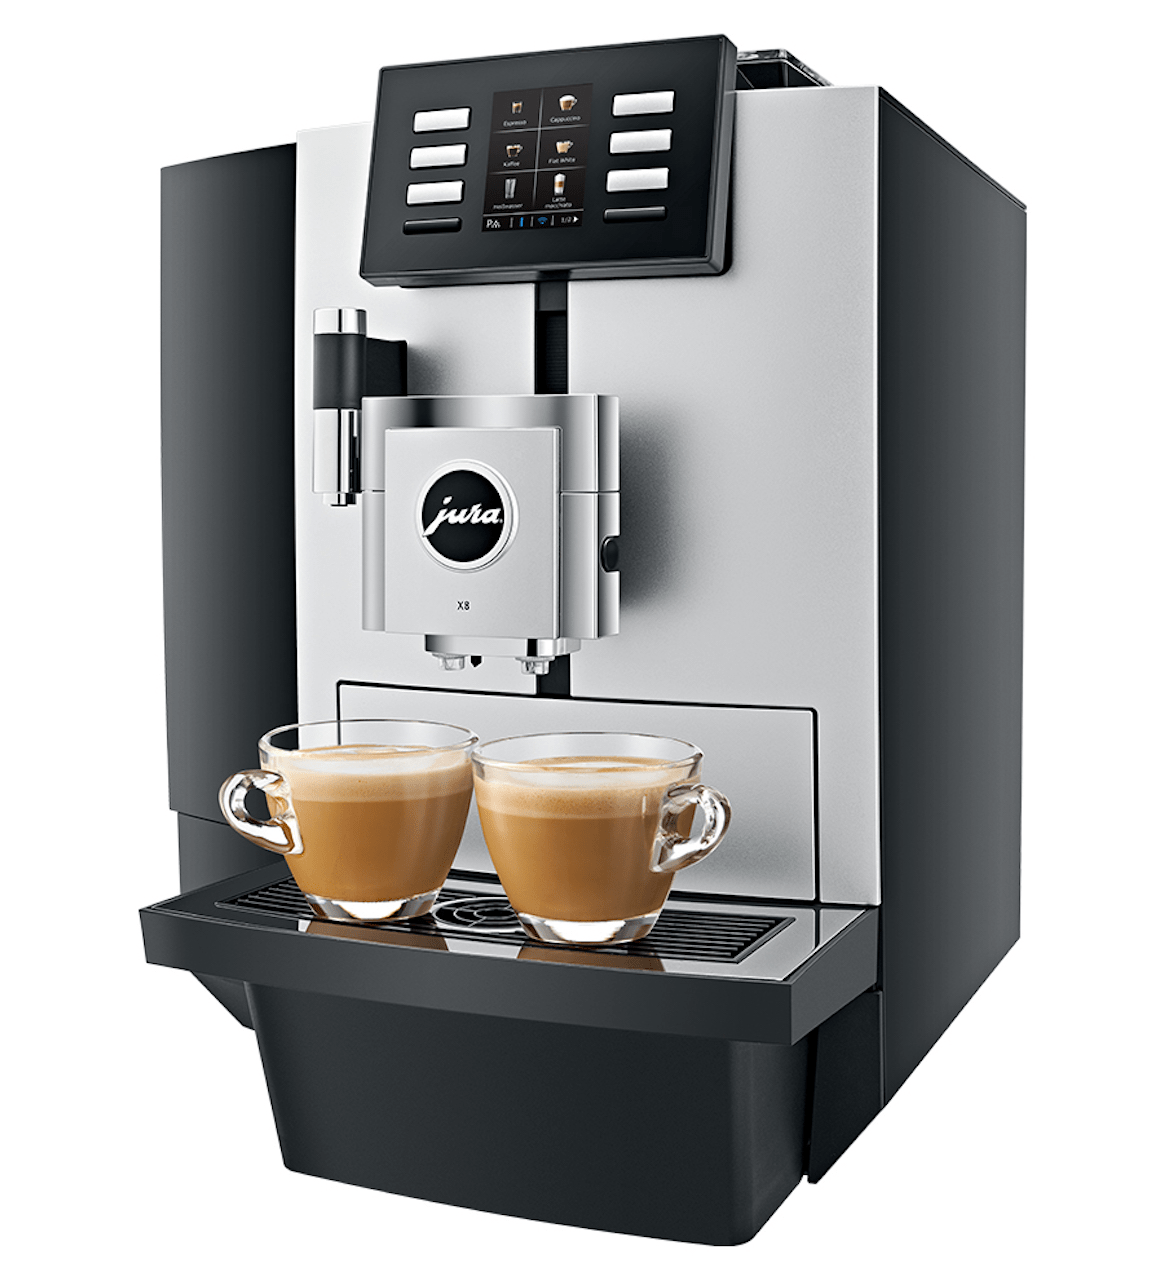 https://coffeesolutions.com.mx/src/productos/Cafetera_Jura_X8_Modelo_15177_img1.png